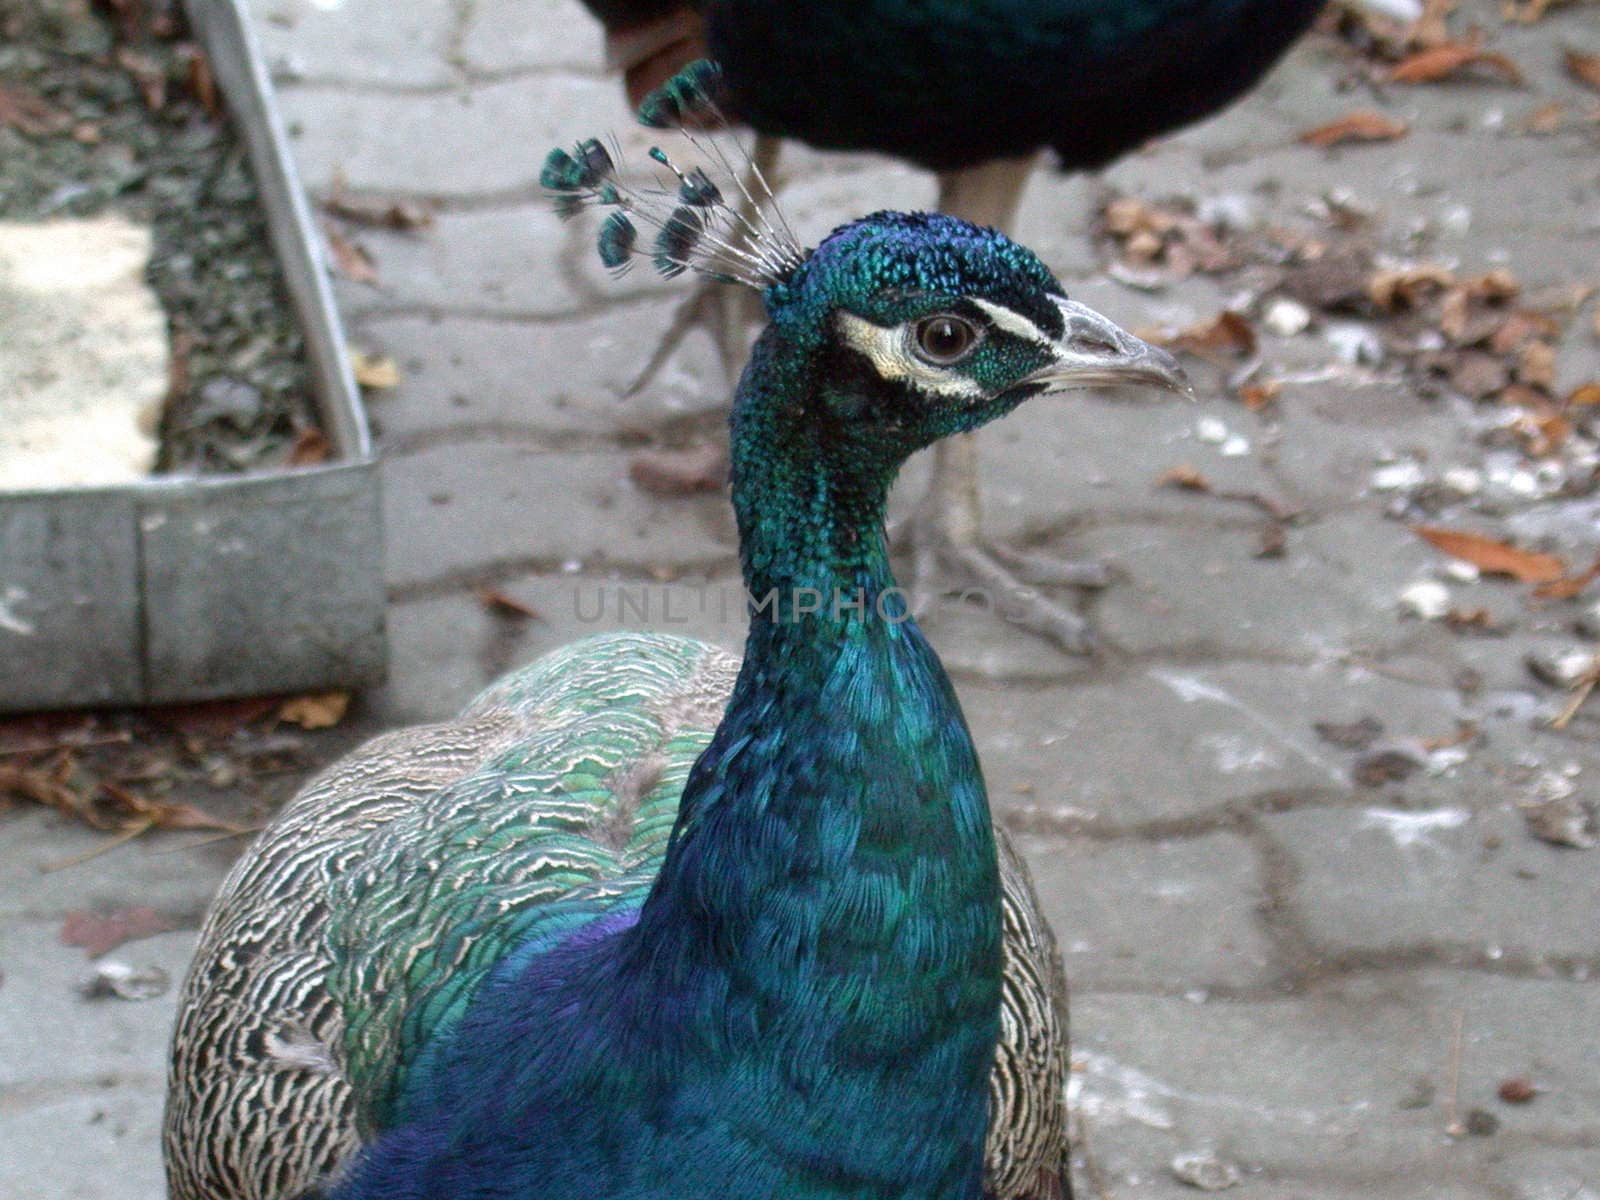 The peacock in zoo